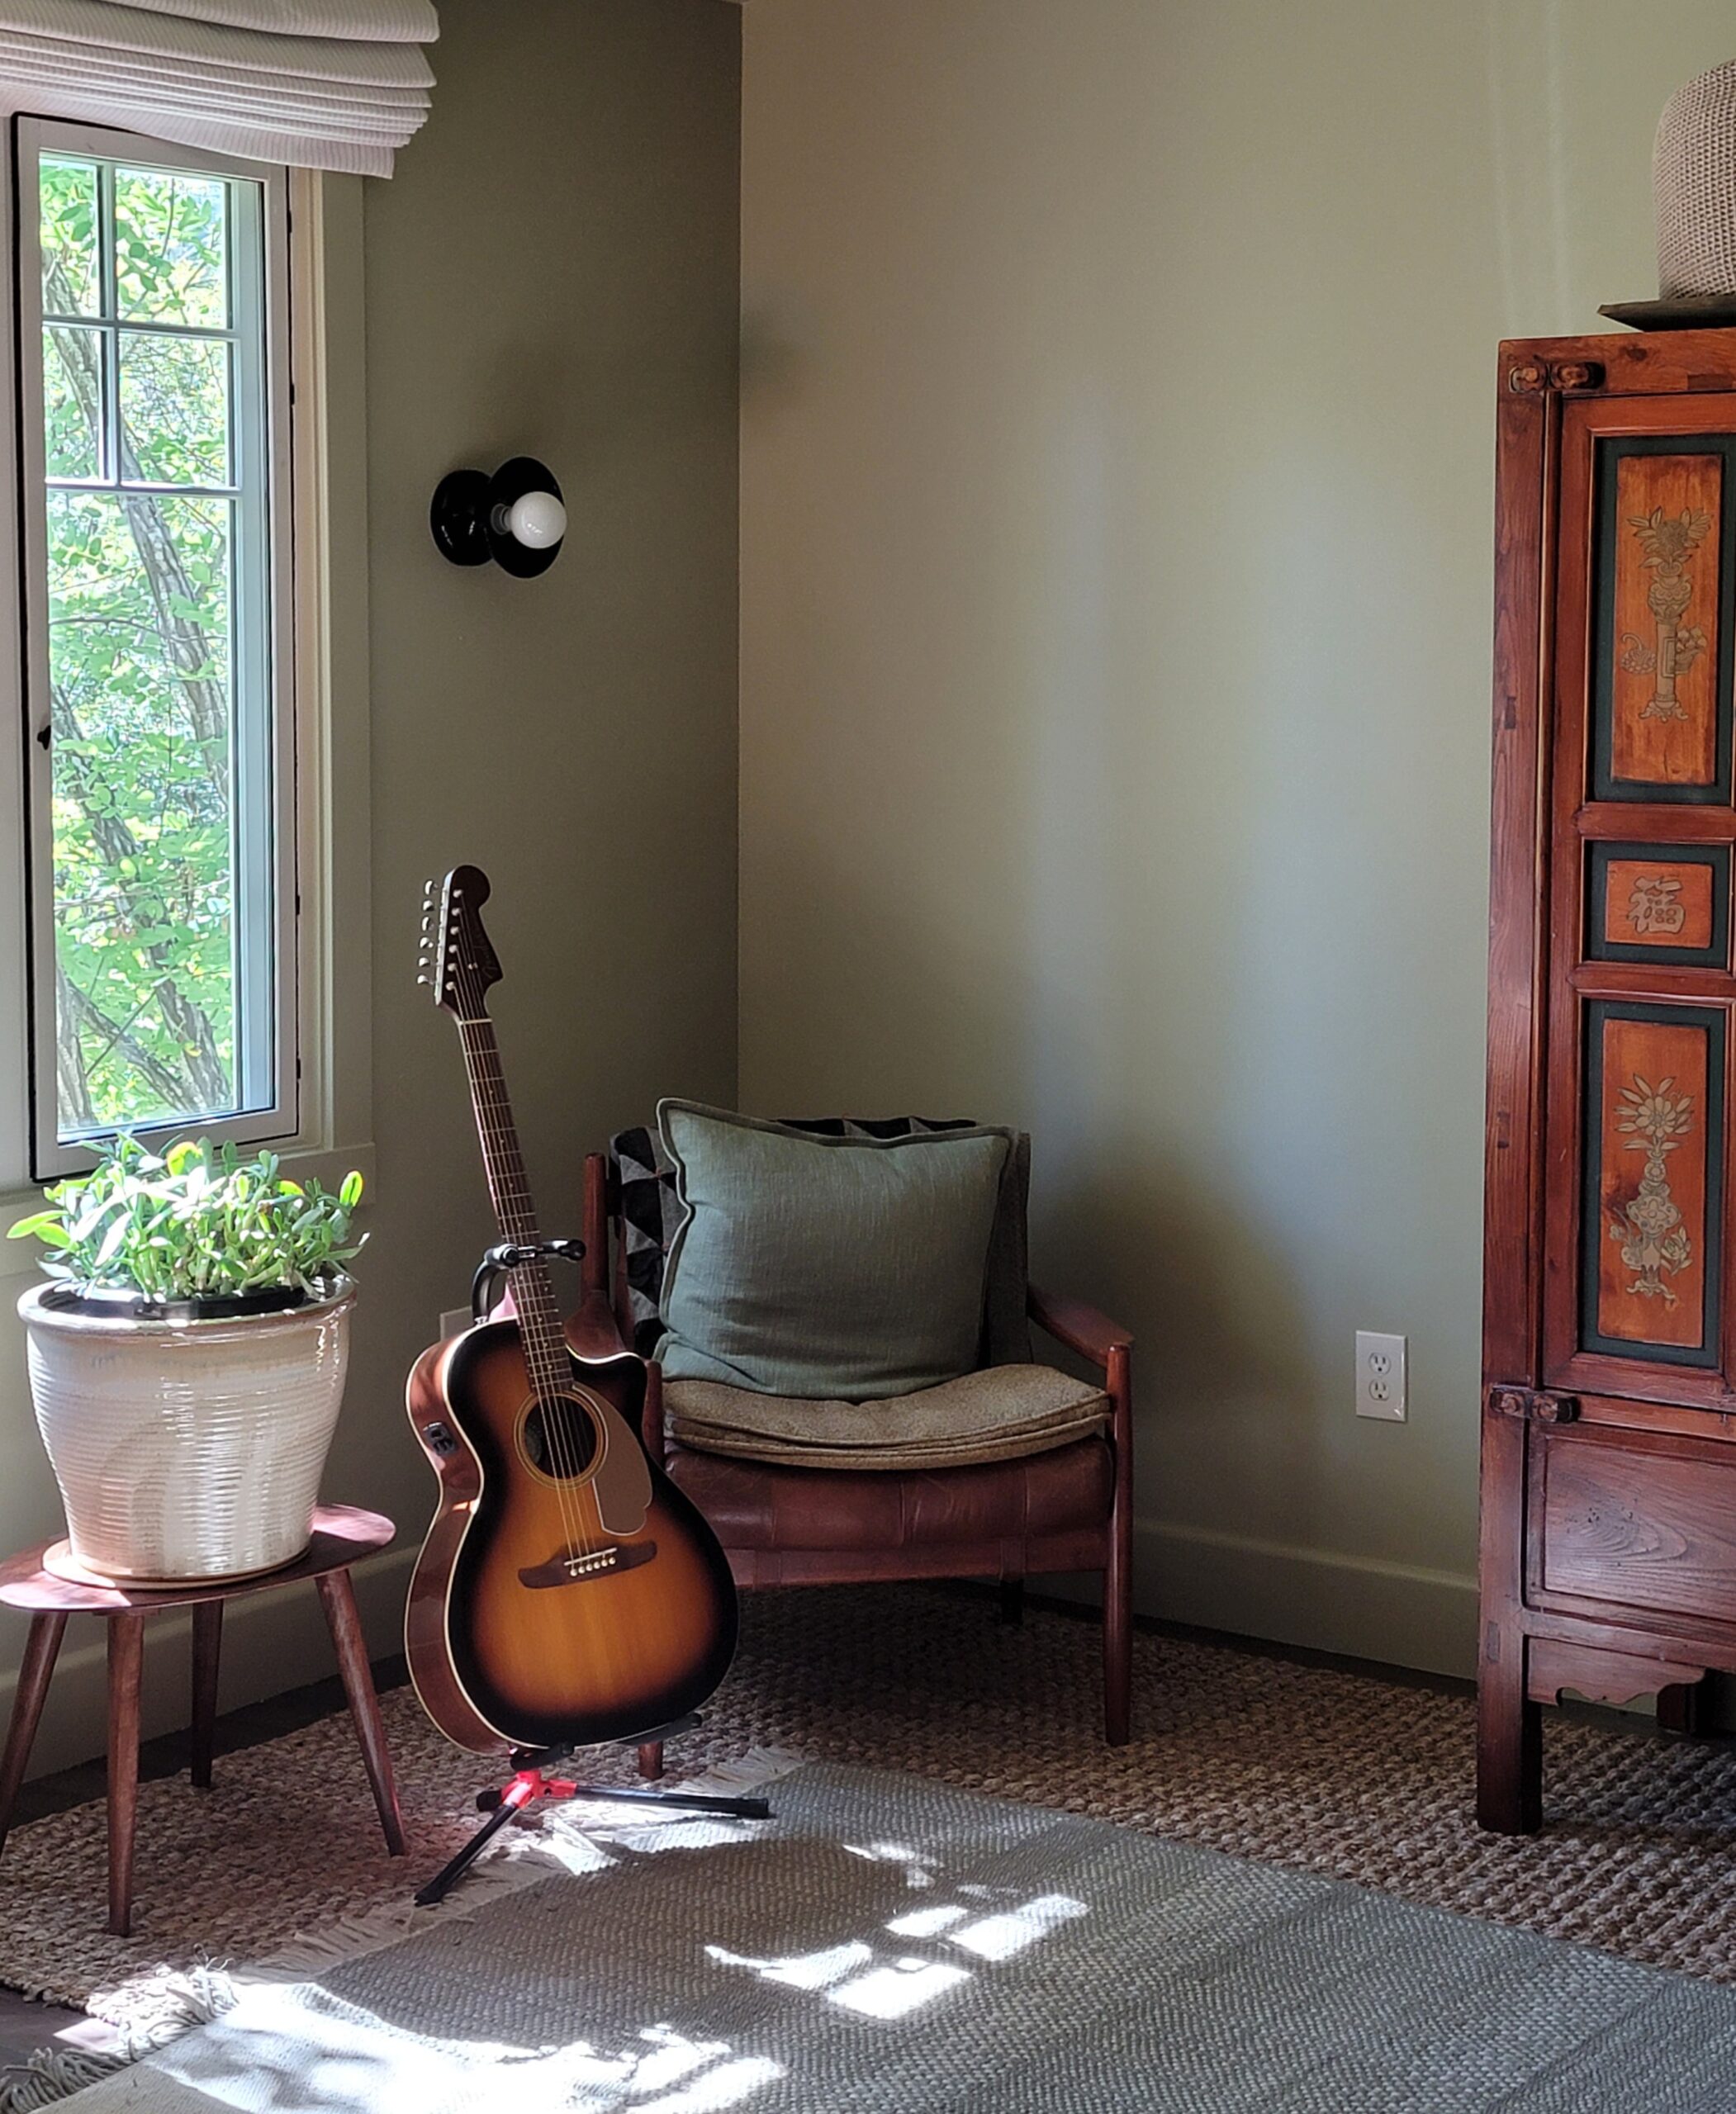 A Fender guitar in a room at Dawn Ranch in Guerneville. (Courtesy of Dawn Ranch)